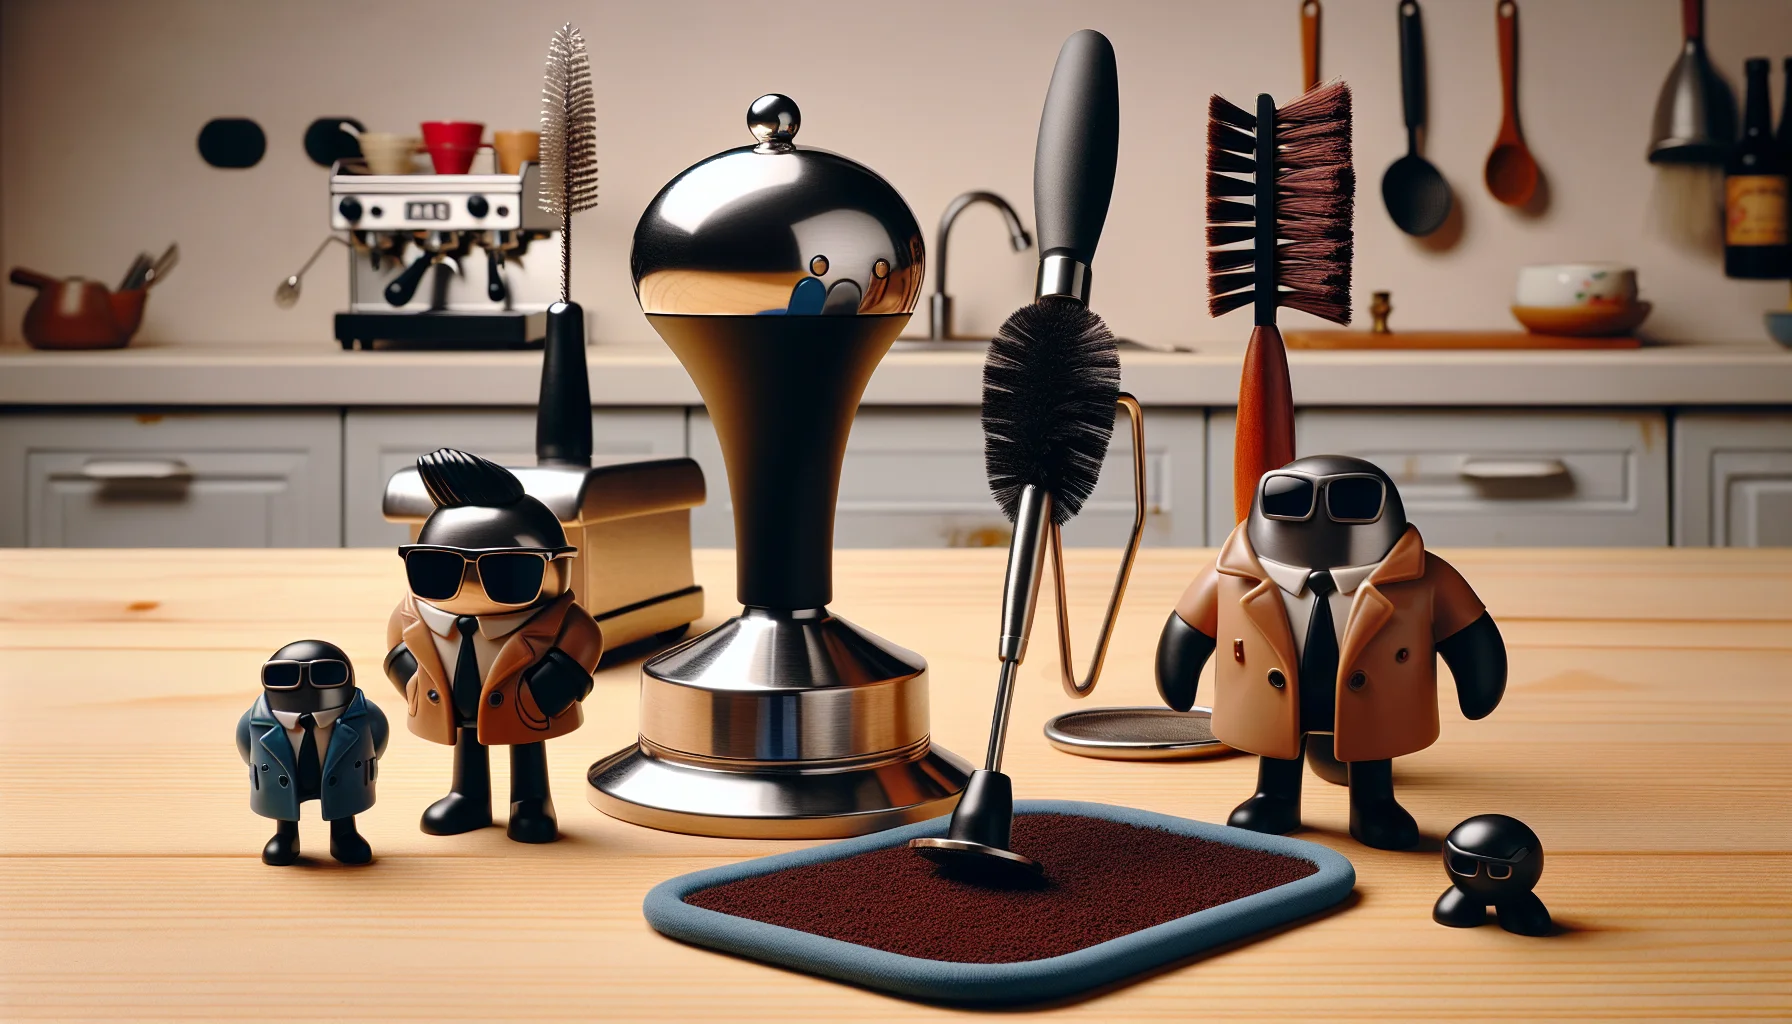 This is a fun and intriguing scene featuring an espresso tamper kit. There are multiple tools including a stainless steel tamper, a cleaning brush, and a tamp mat standing as characters in a comedy skit. The tamper, with its shiny surface, is wearing sunglasses like a cool hero. The brush is dressed like a meticulous investigator, constantly cleaning up, and the tamp mat, with its rubbery texture, is depicted like a friendly, chubby character always ready to catch the falling coffee grounds. They're in a lively kitchen setup, partaking in a series of humorous acts which make everyday coffee making an adventure. This image entices people to indulge, appreciate and enjoy their espresso routines.